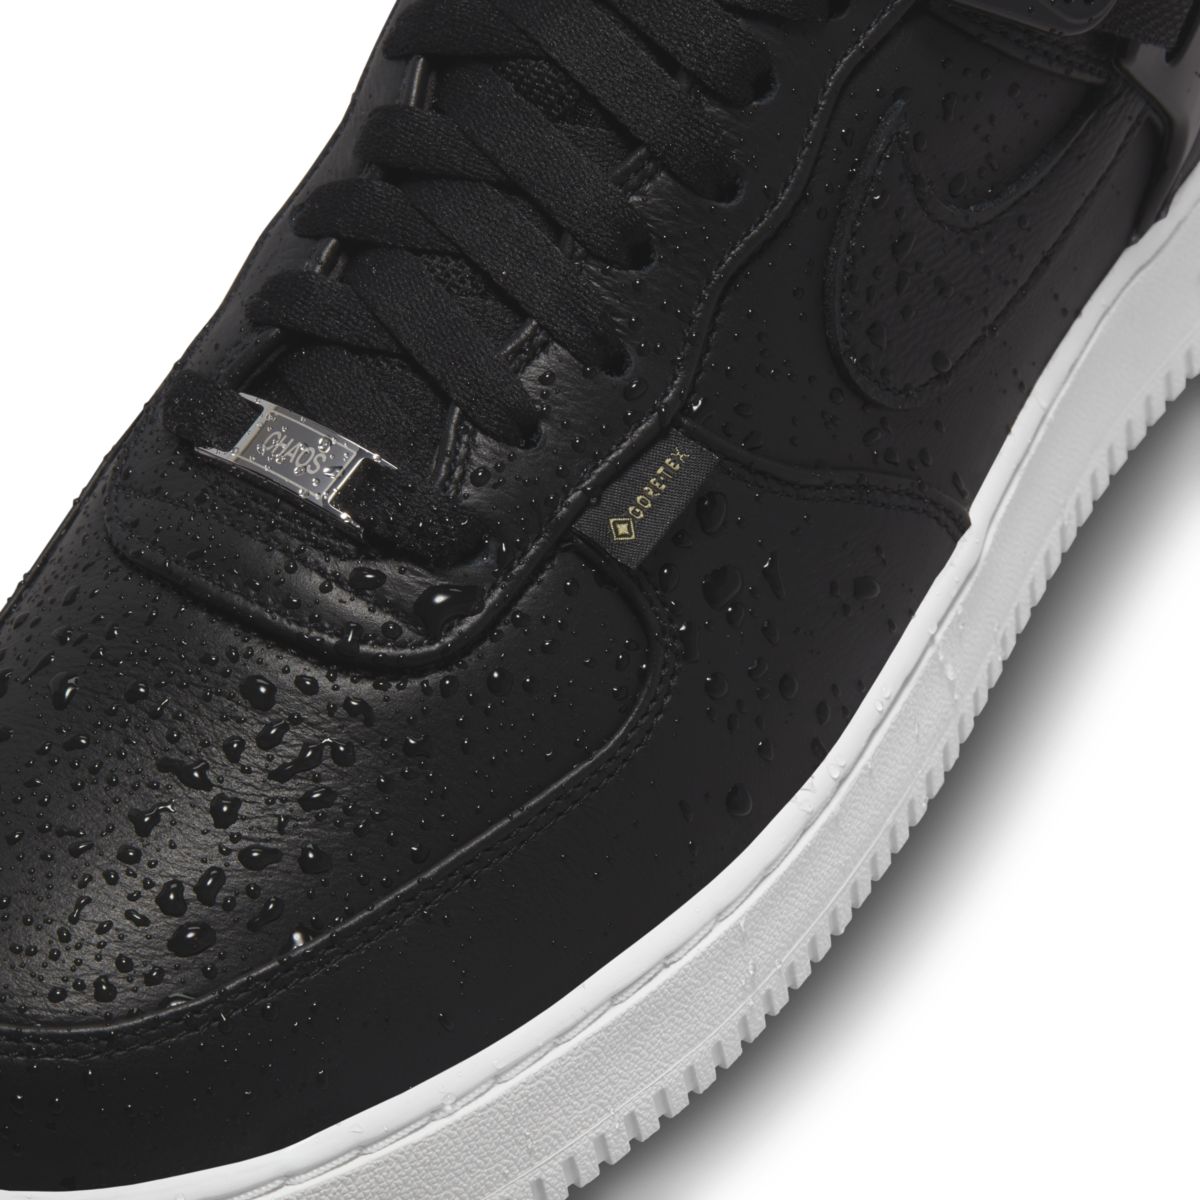 Undercover x Nike Air Force 1 Low Black DQ7558-002 10